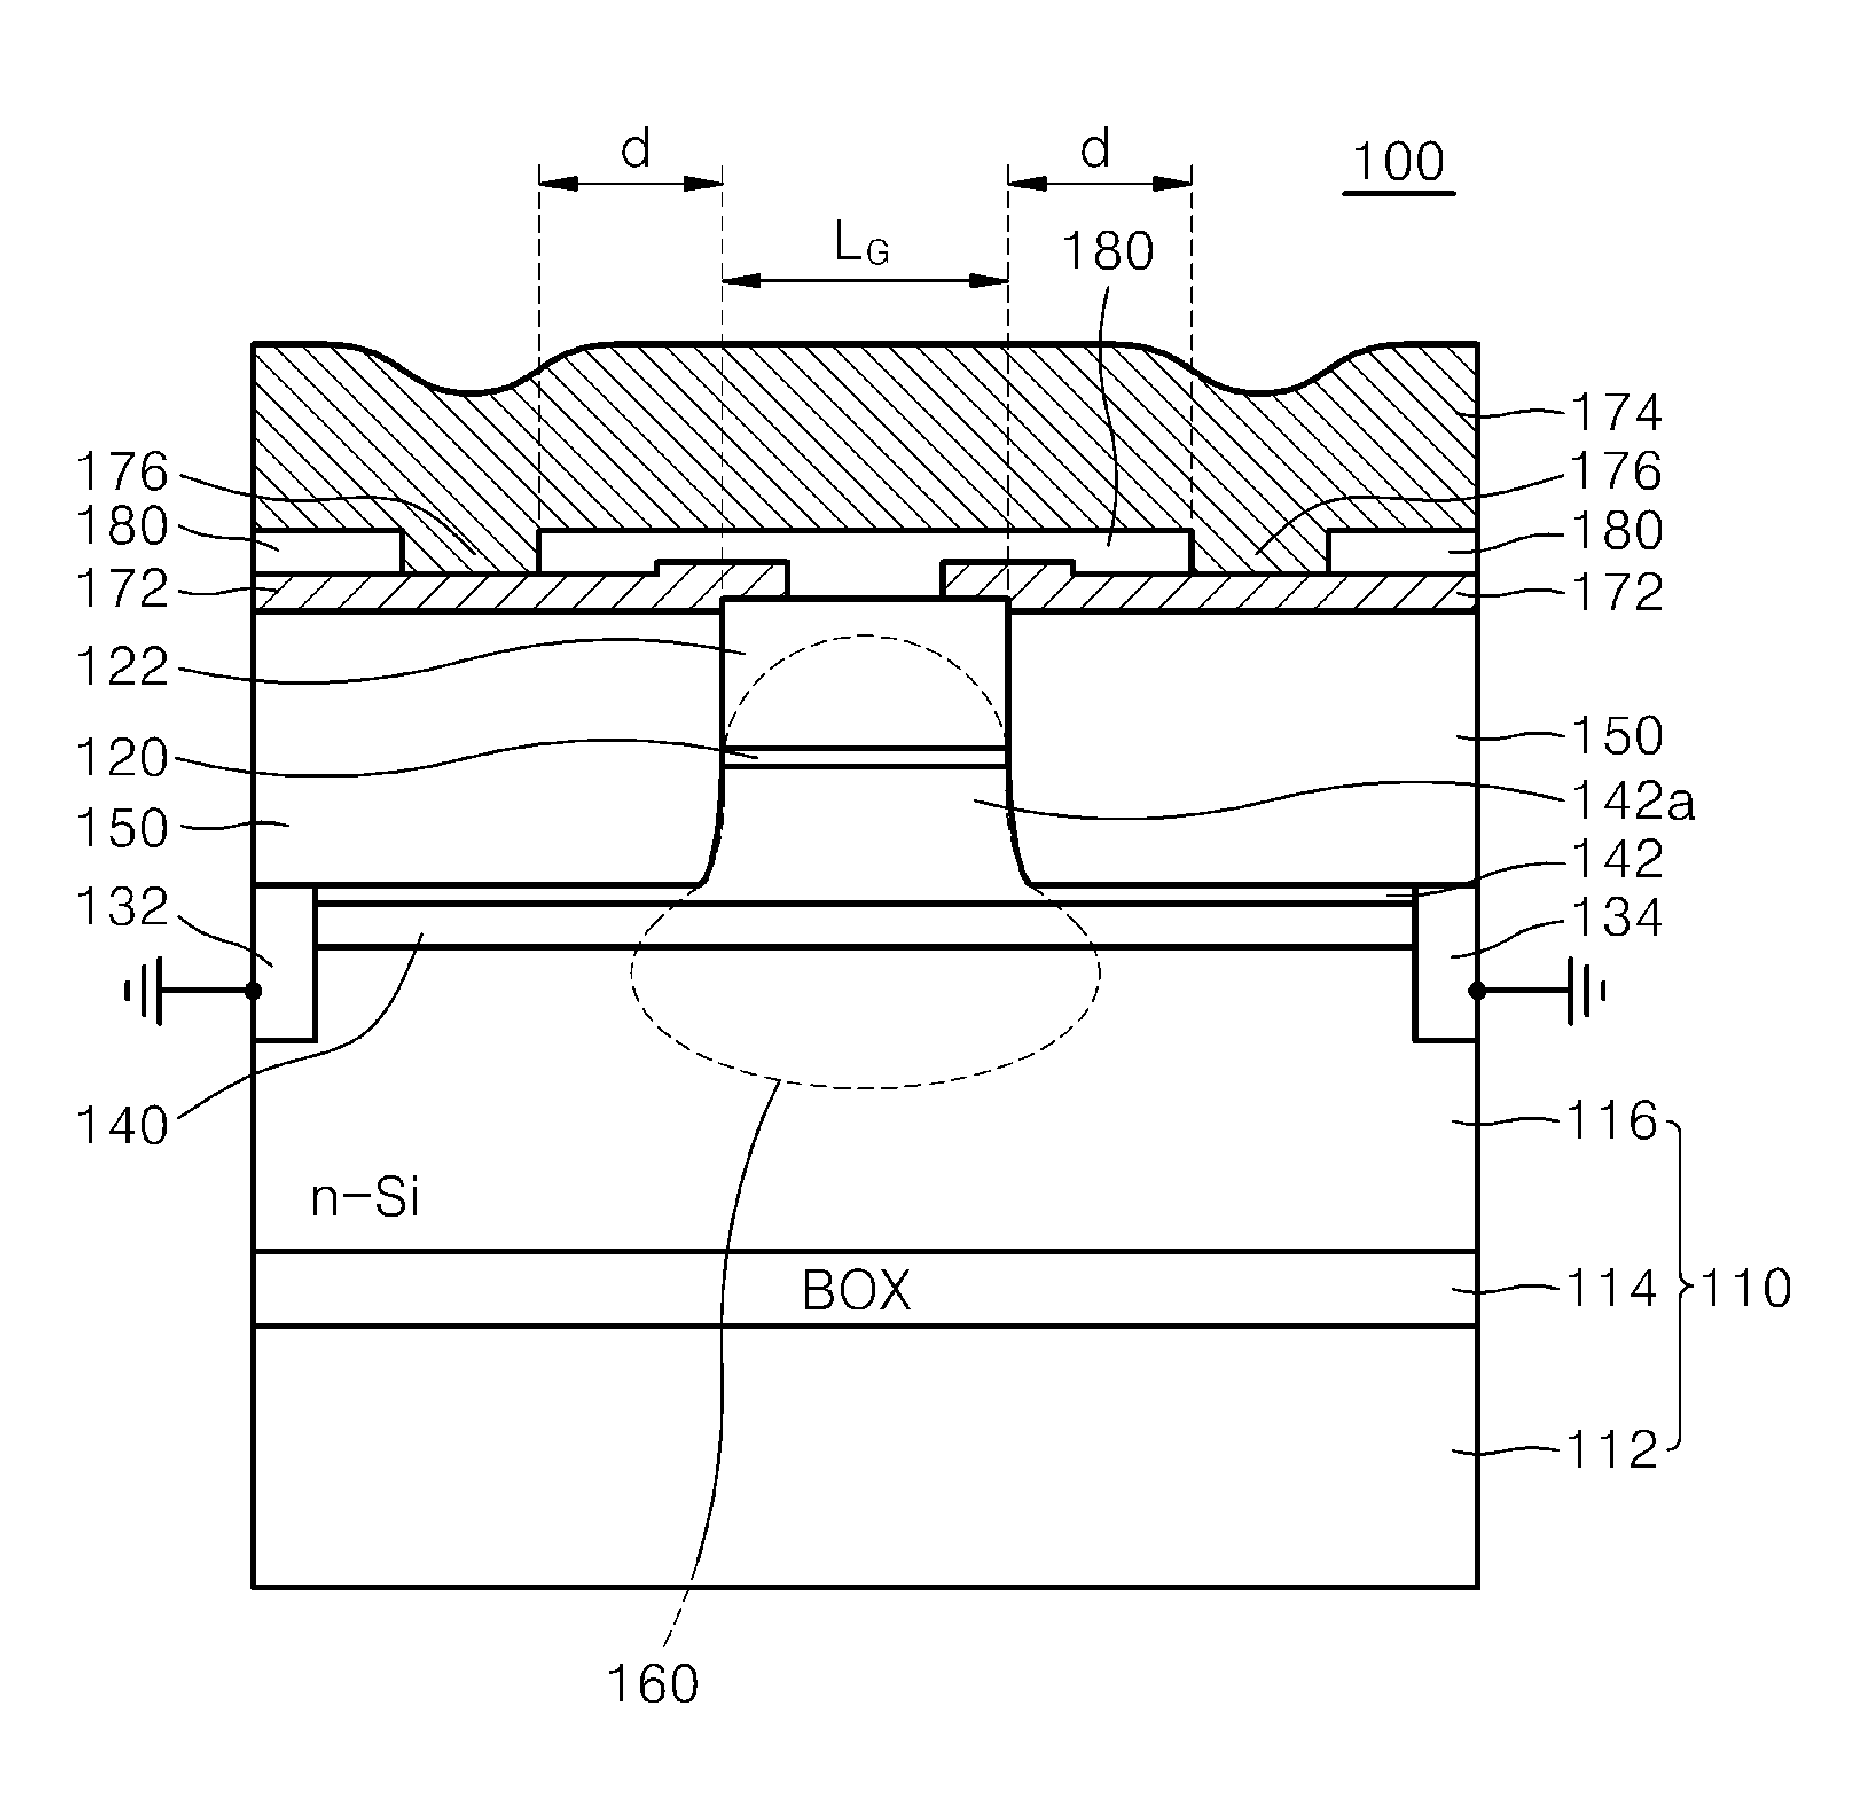 Optical device having strained buried channel